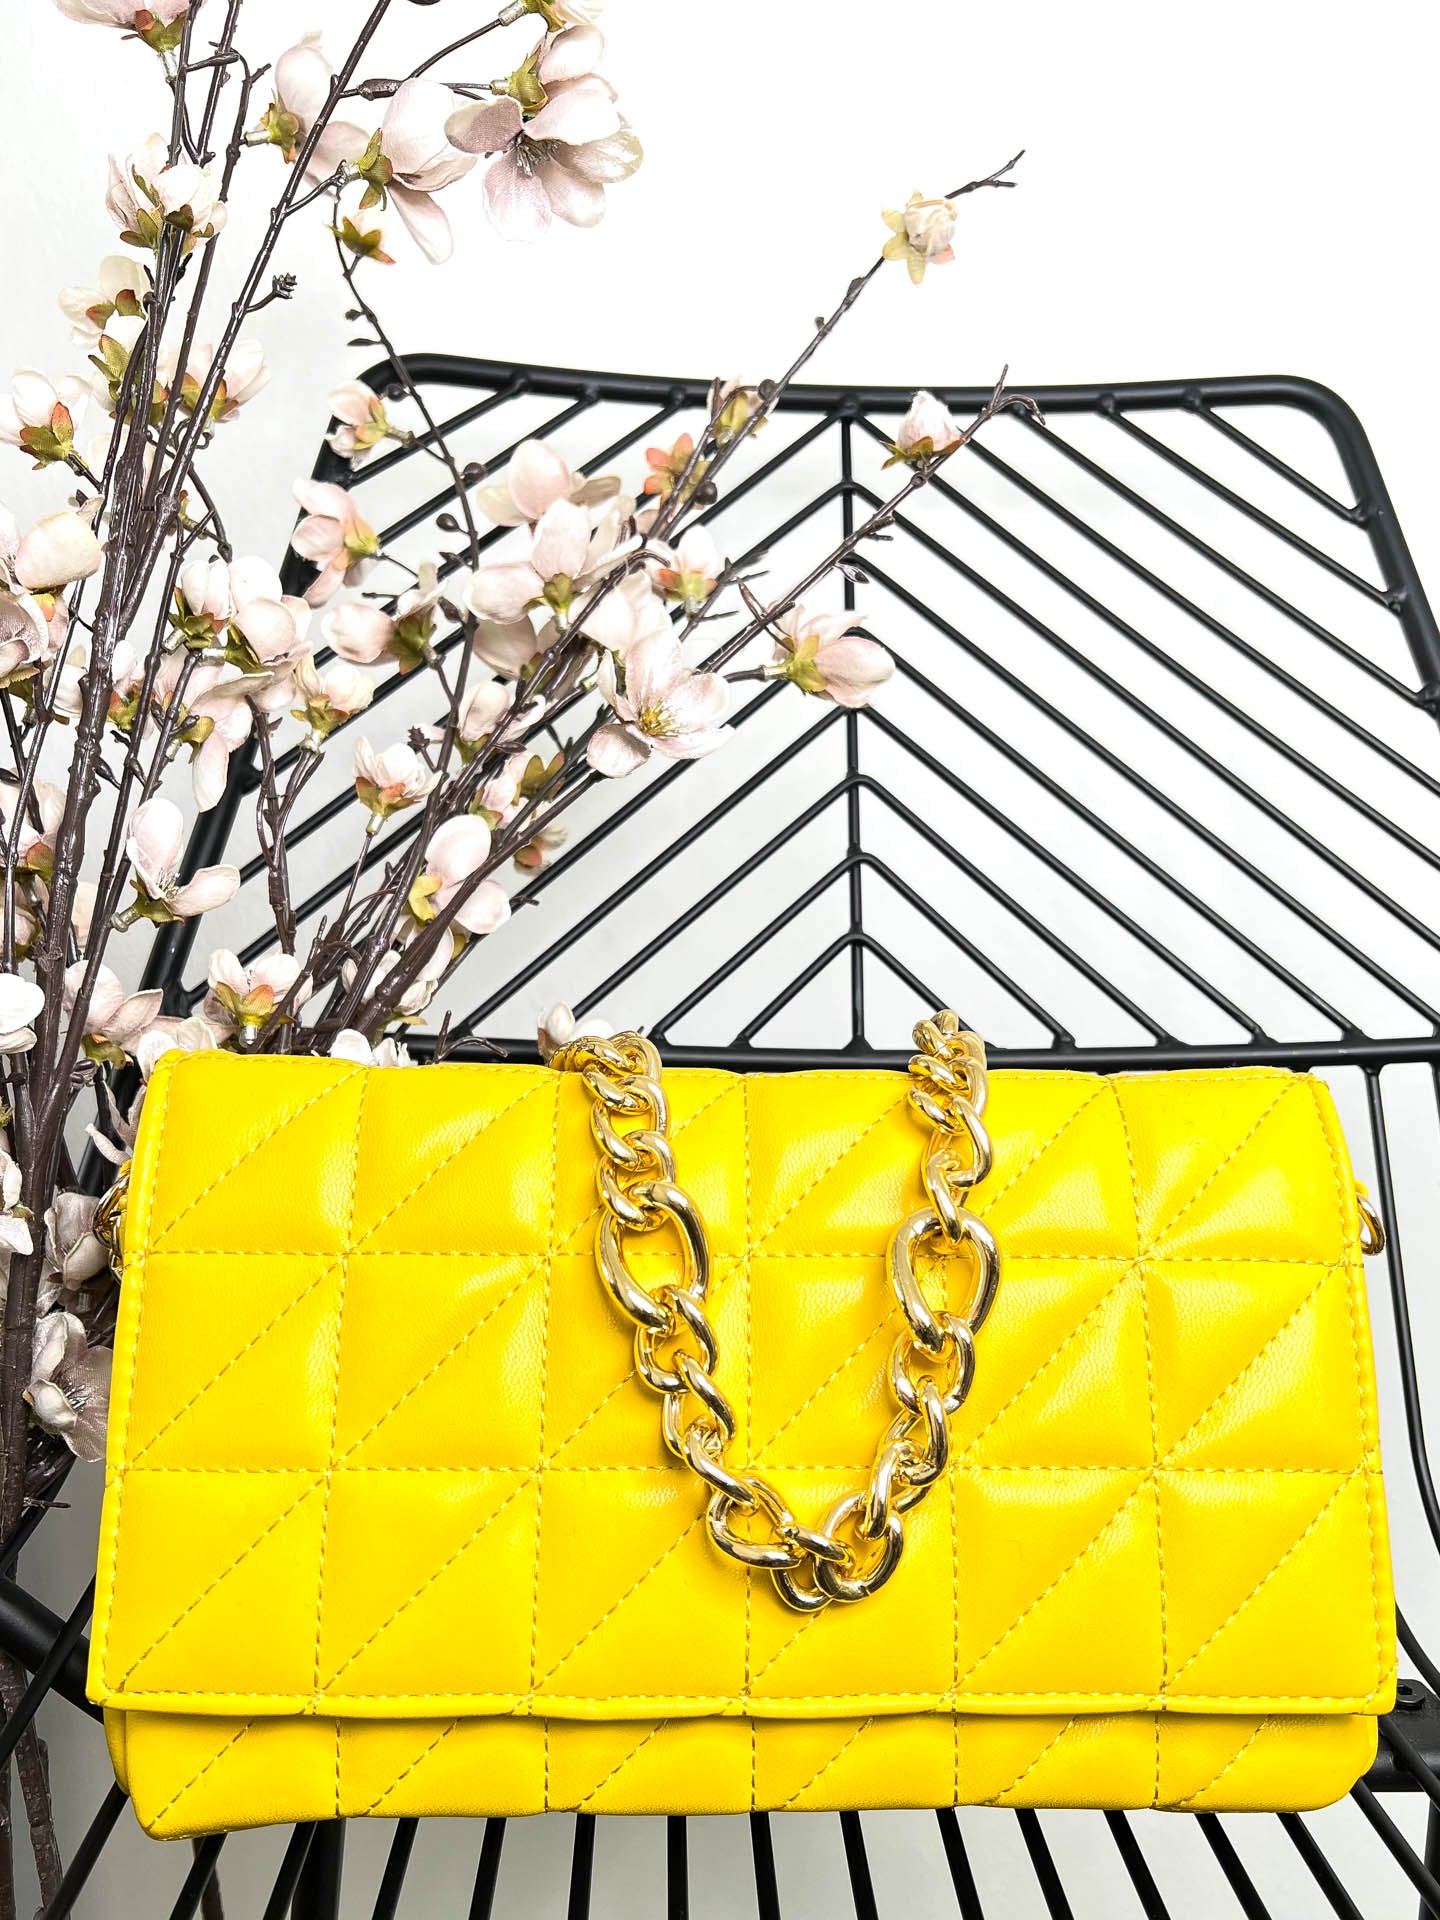 The Ceris - Quilted Gold Chain Bag